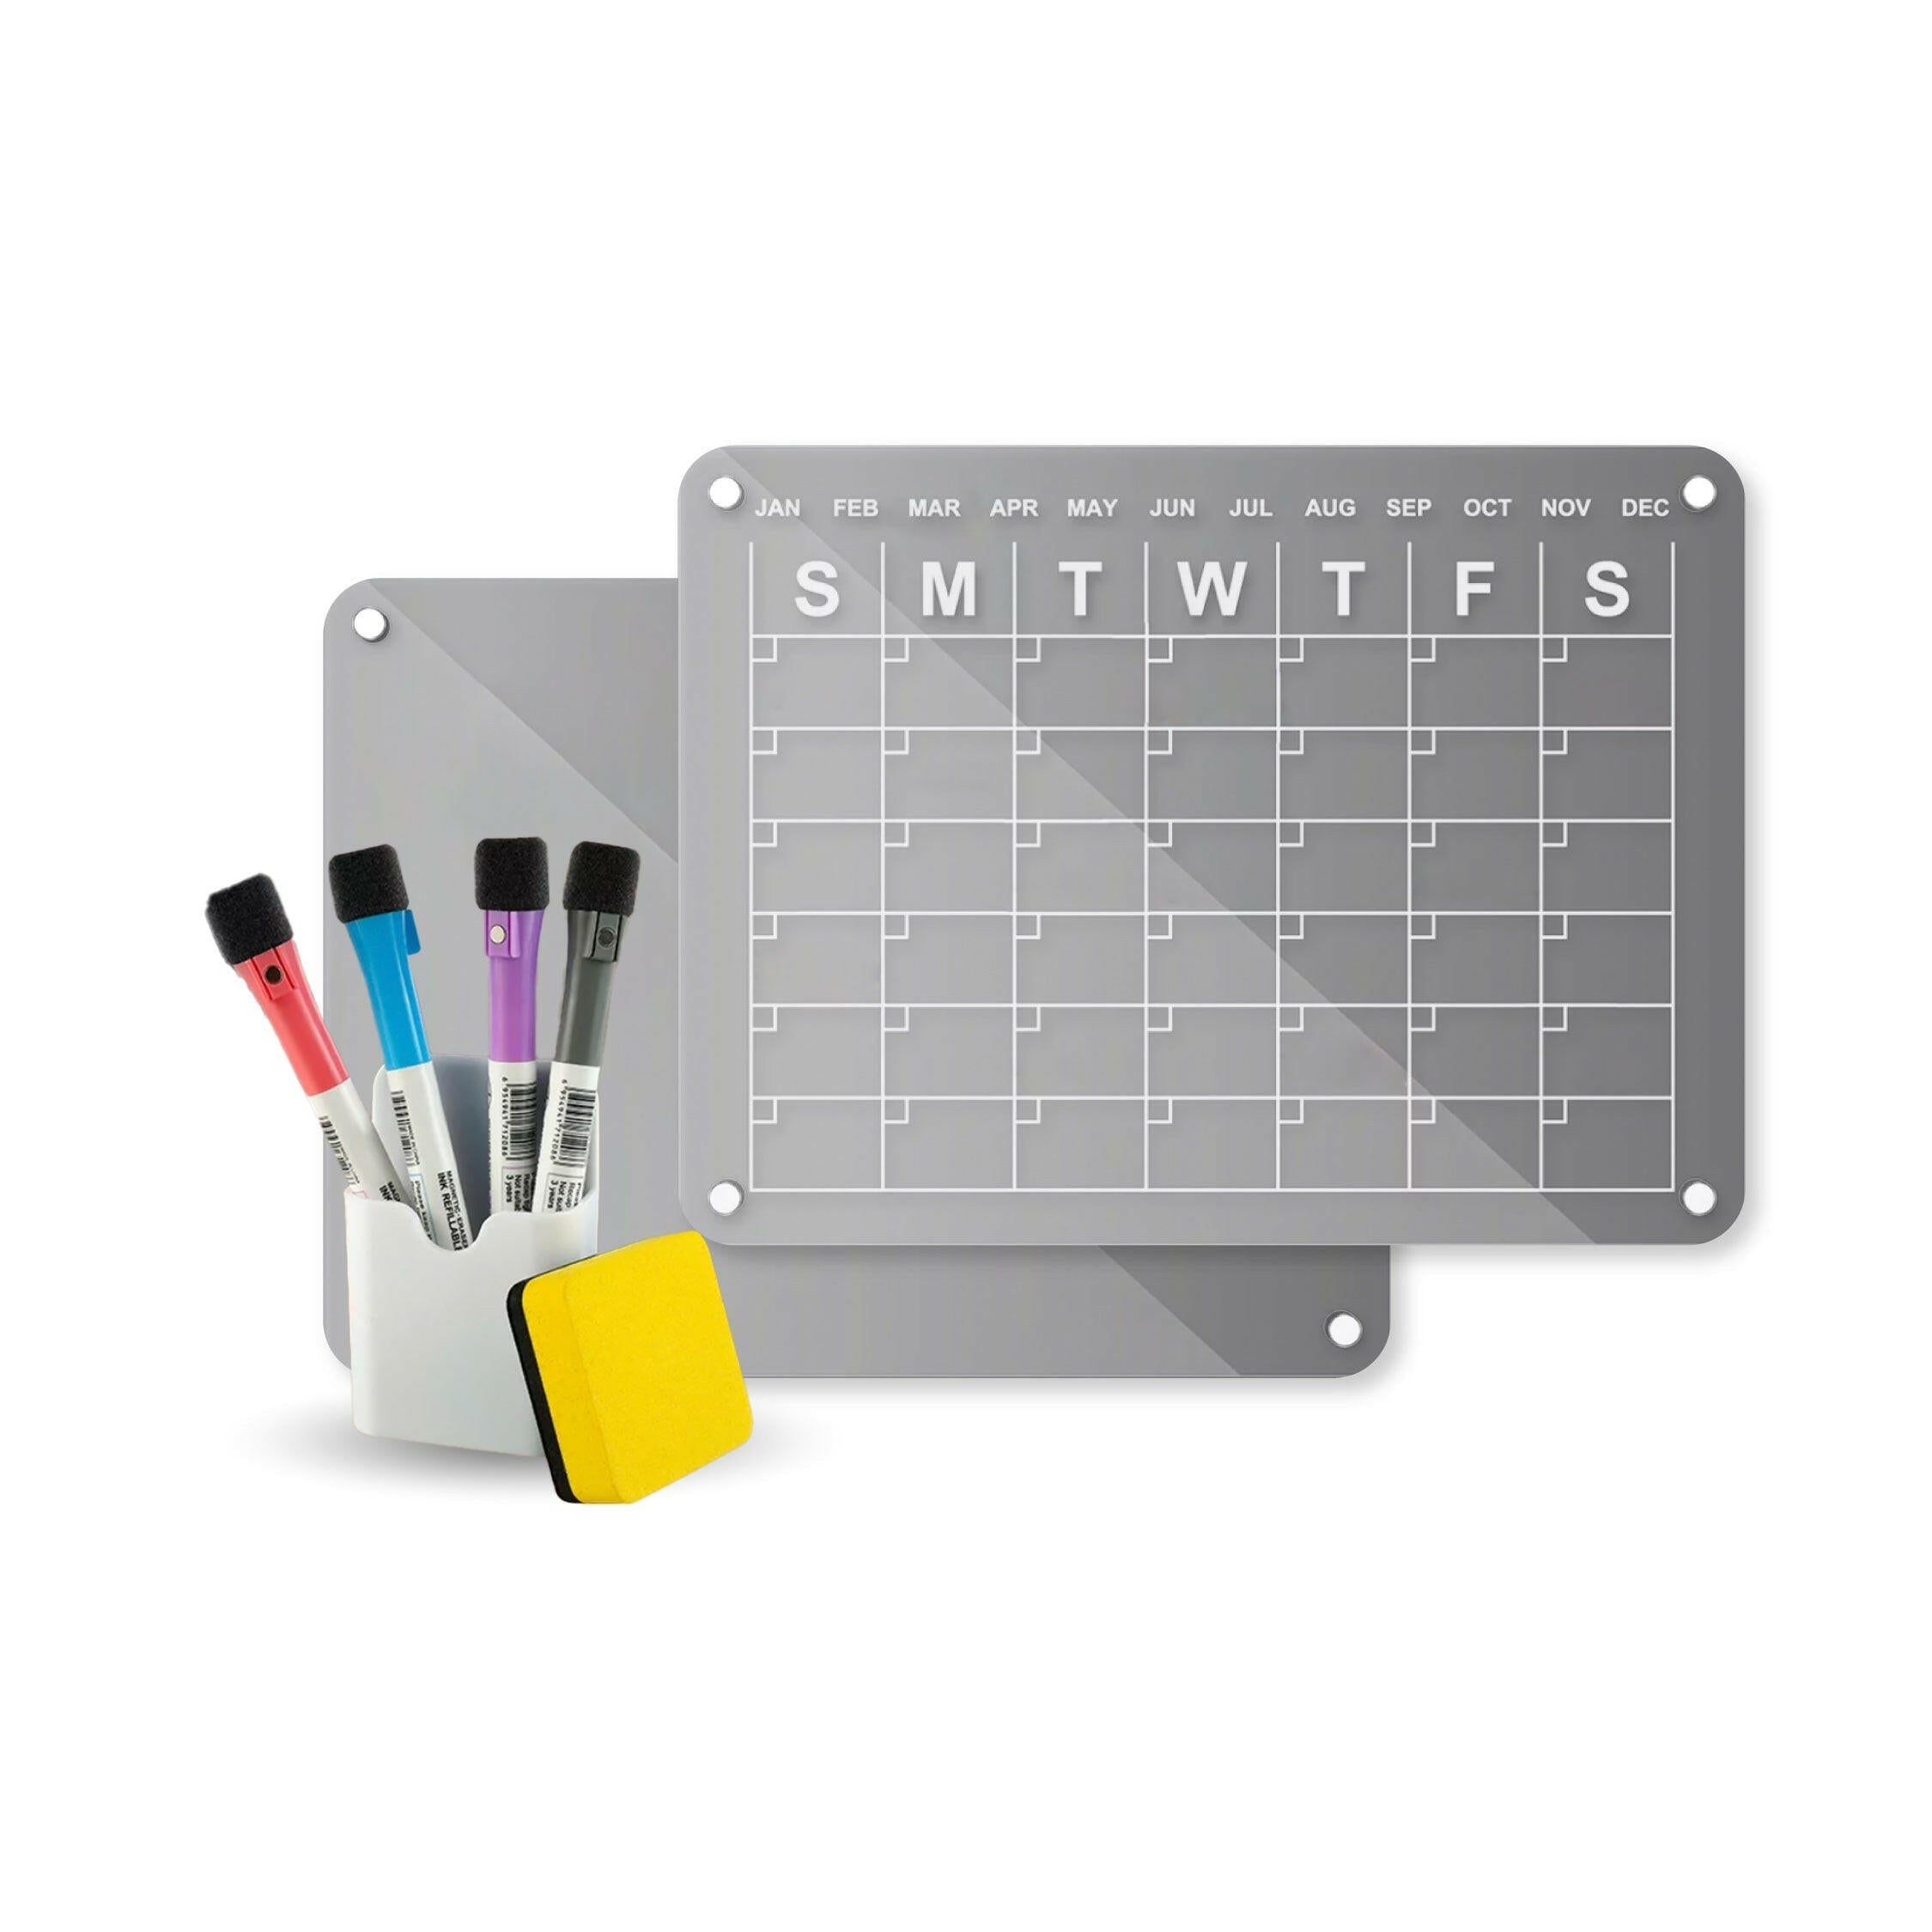 Organize with Style: Reusable Magnetic Dry Erase Calendar Board for Your Fridge